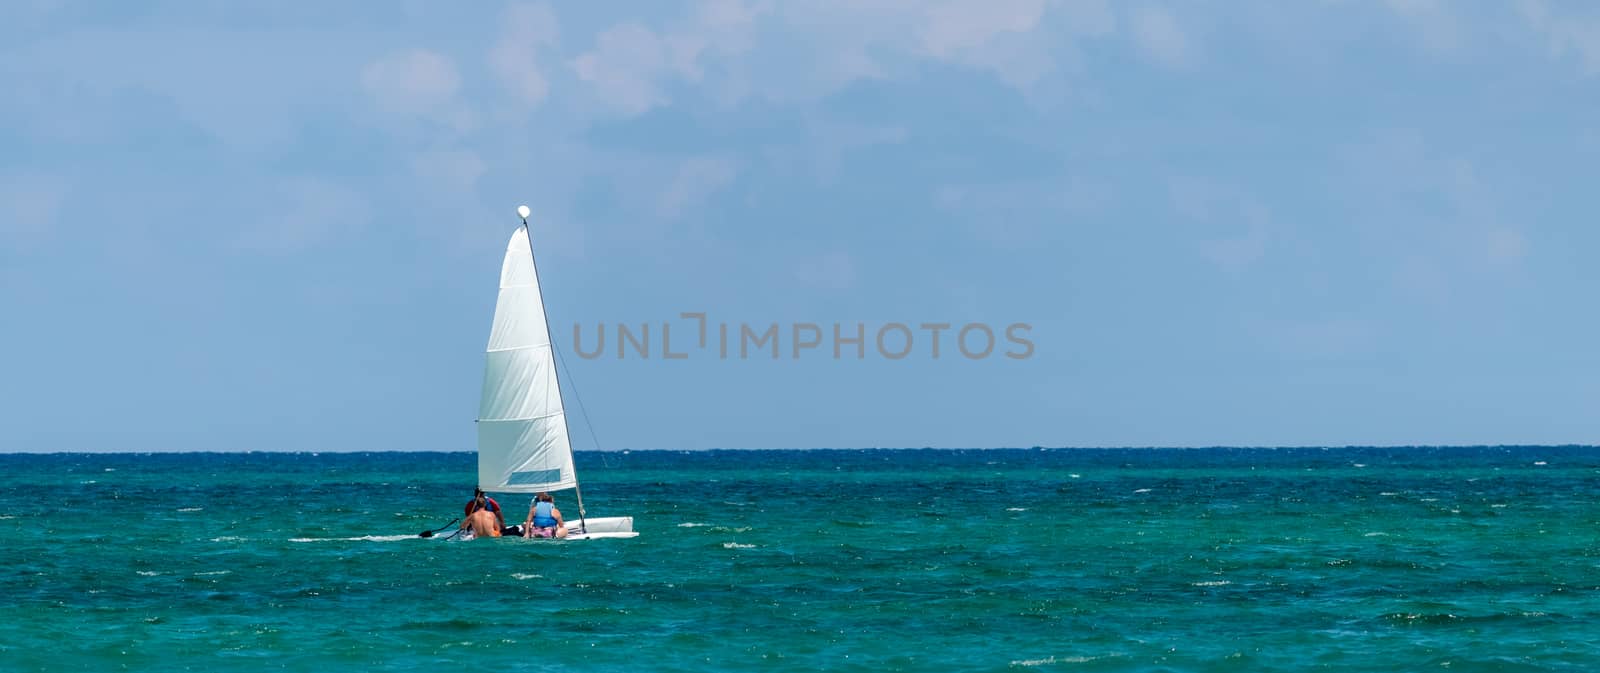 Nautical background of a white sailboat in bright sunlight, on blue ocean water, with space for text by leo_de_la_garza